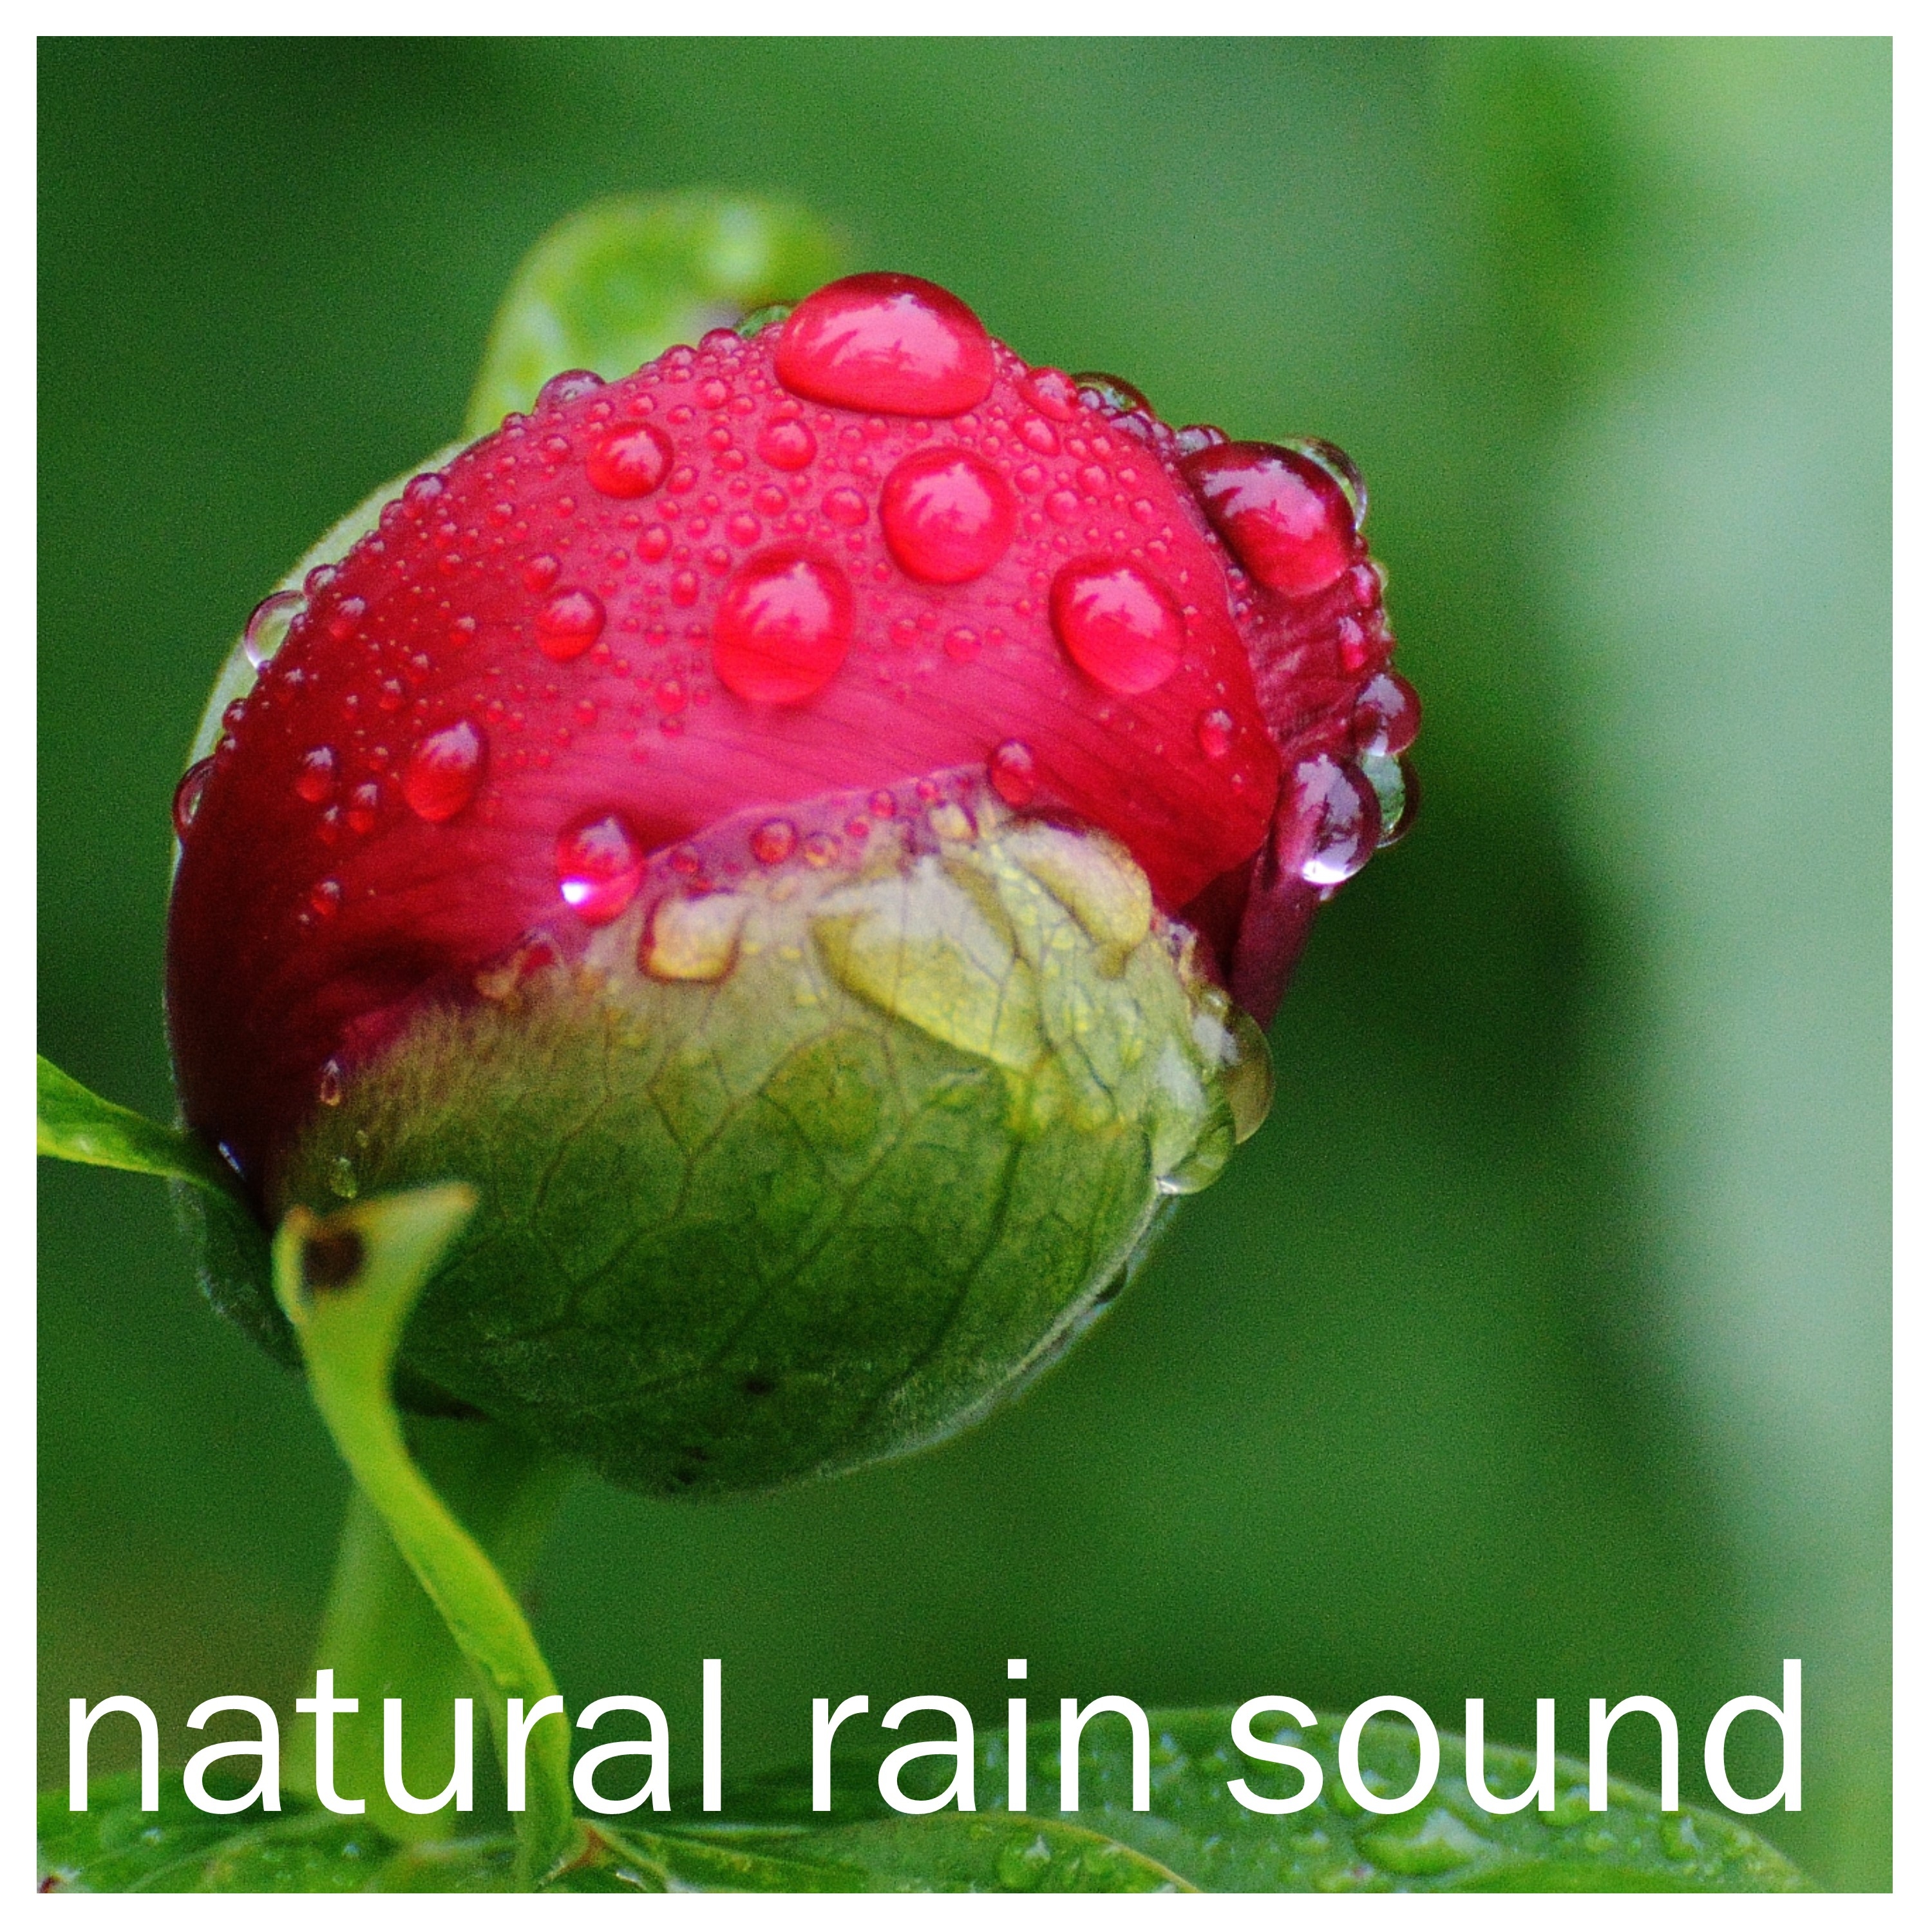 16 Rain Sounds to Calm the Mind, Relieve Stress and Unwind